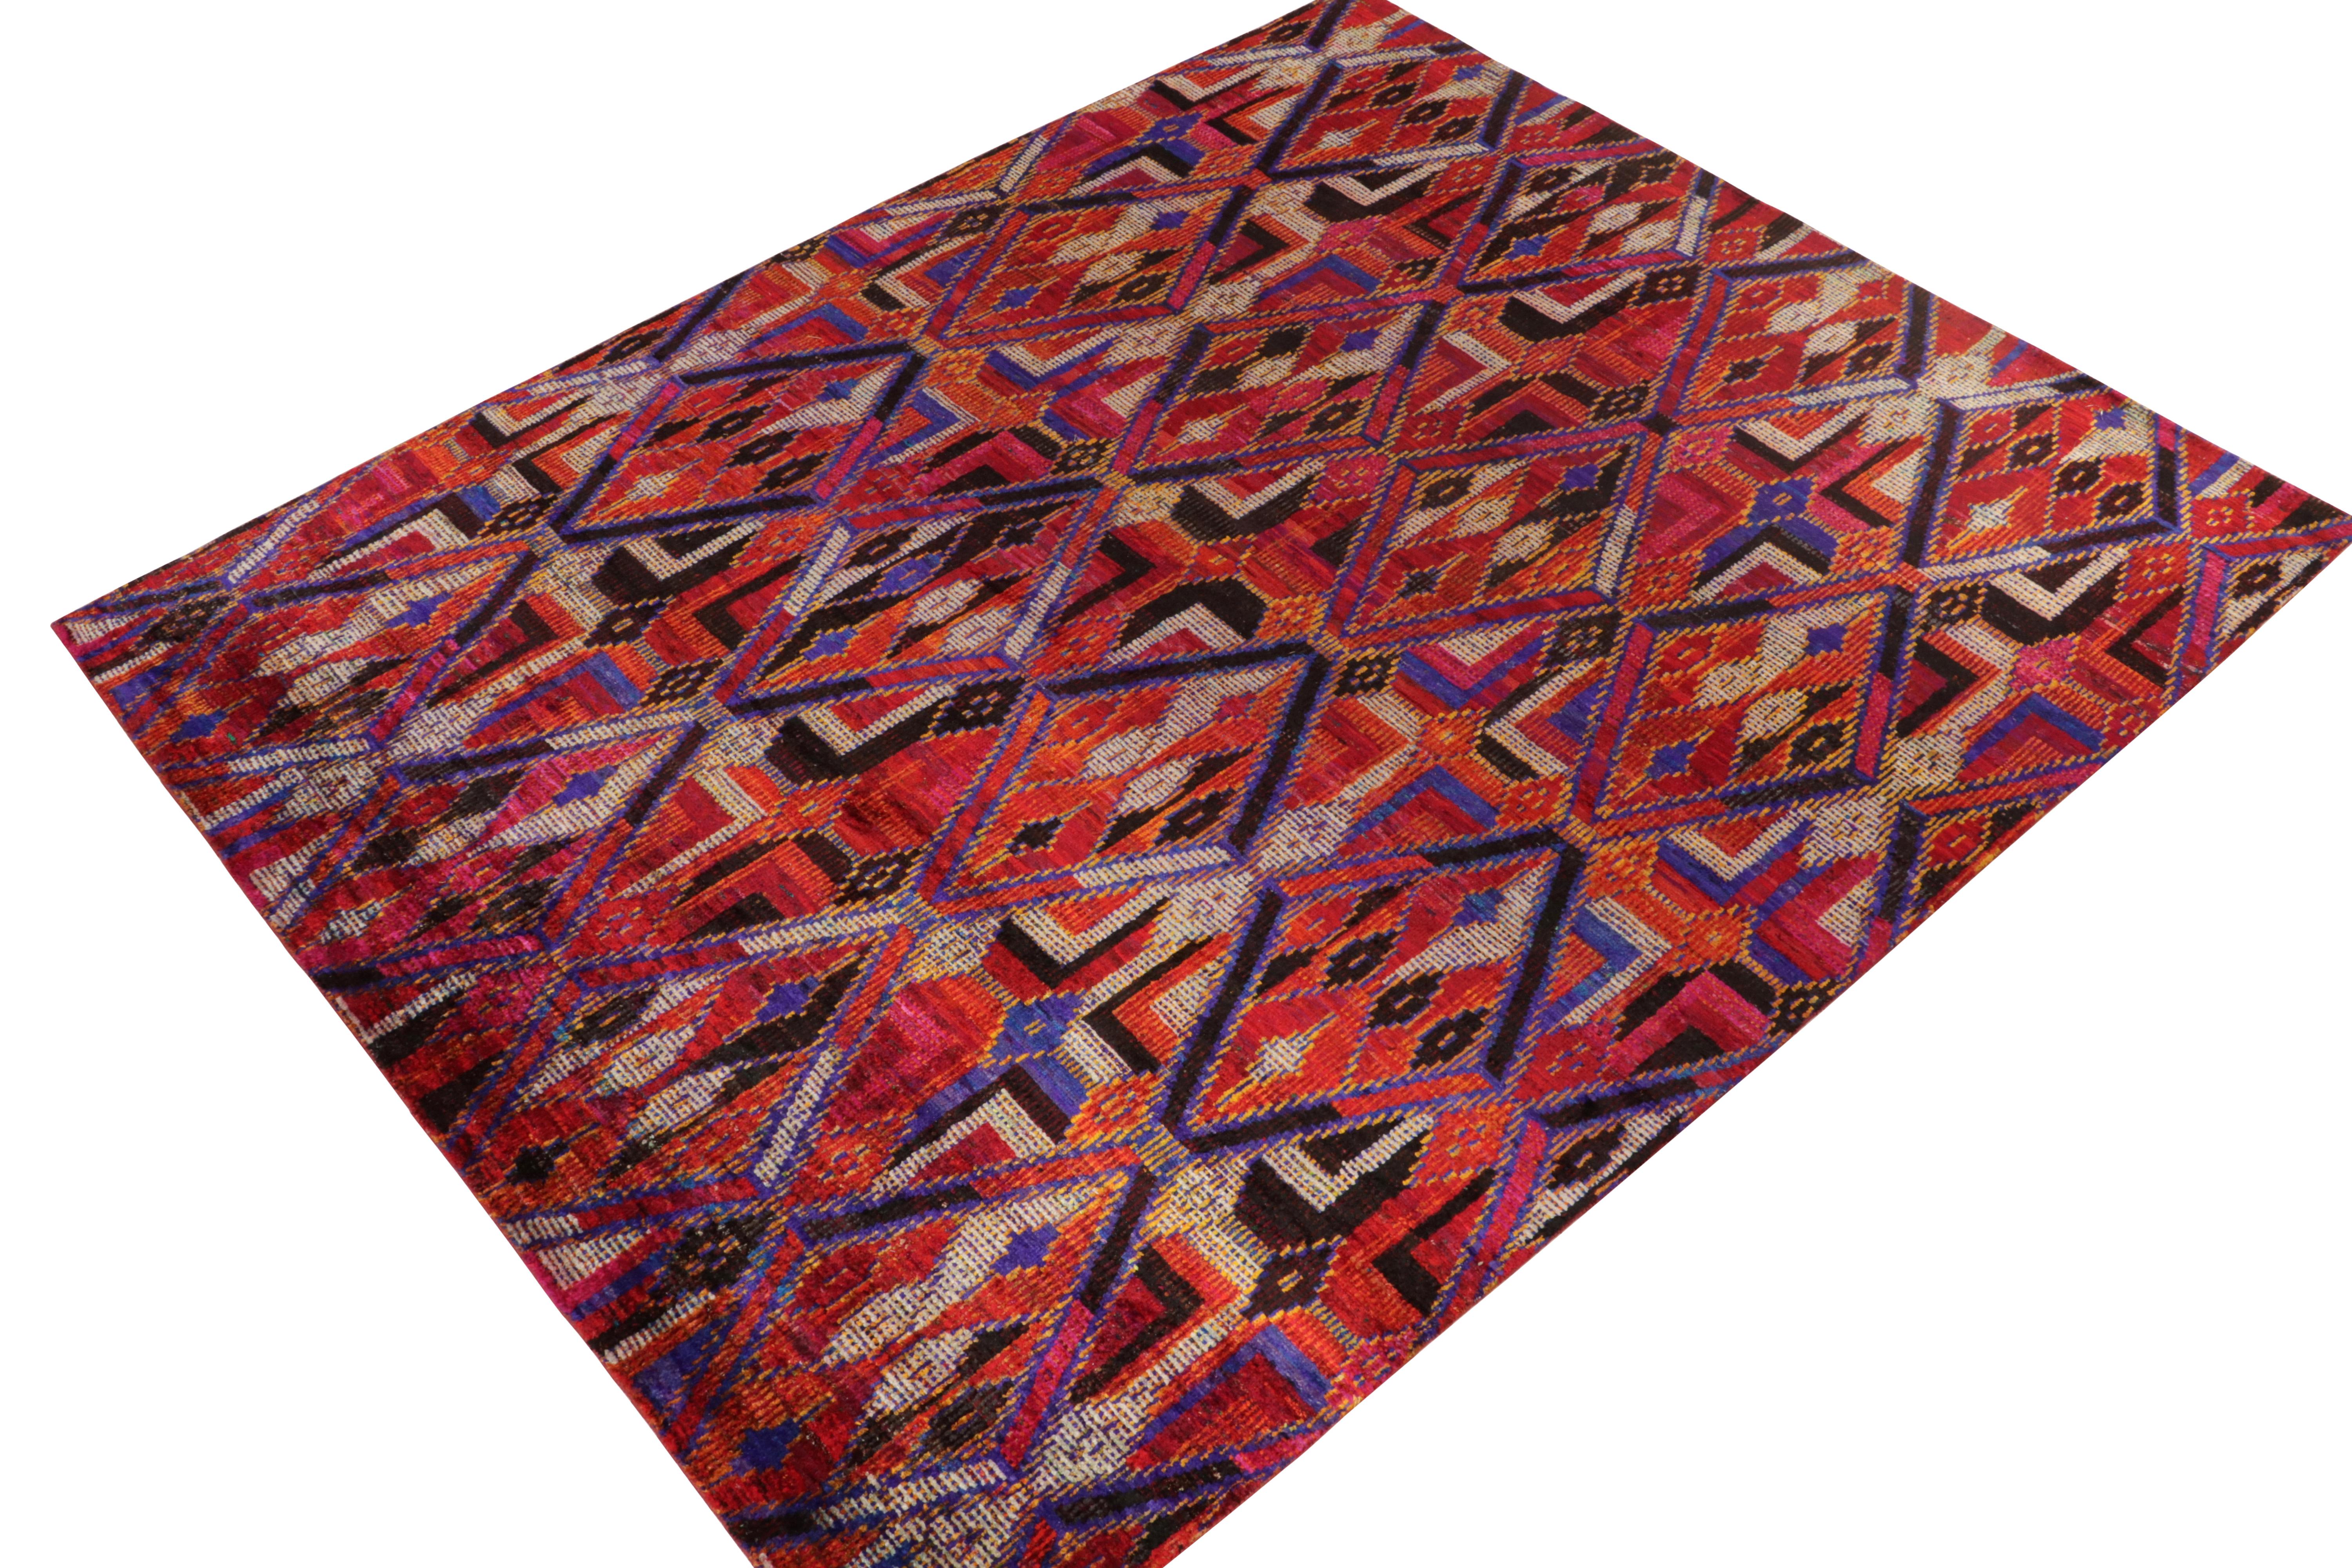 Hand-knotted in a luxurious wool & silk blend, a bold 8x10 contemporary rug with exceptional layering in graphic elements. 

On the Design: The modern design displays a pattern-within-pattern look with diamonds cocooning diamonds in striking red,